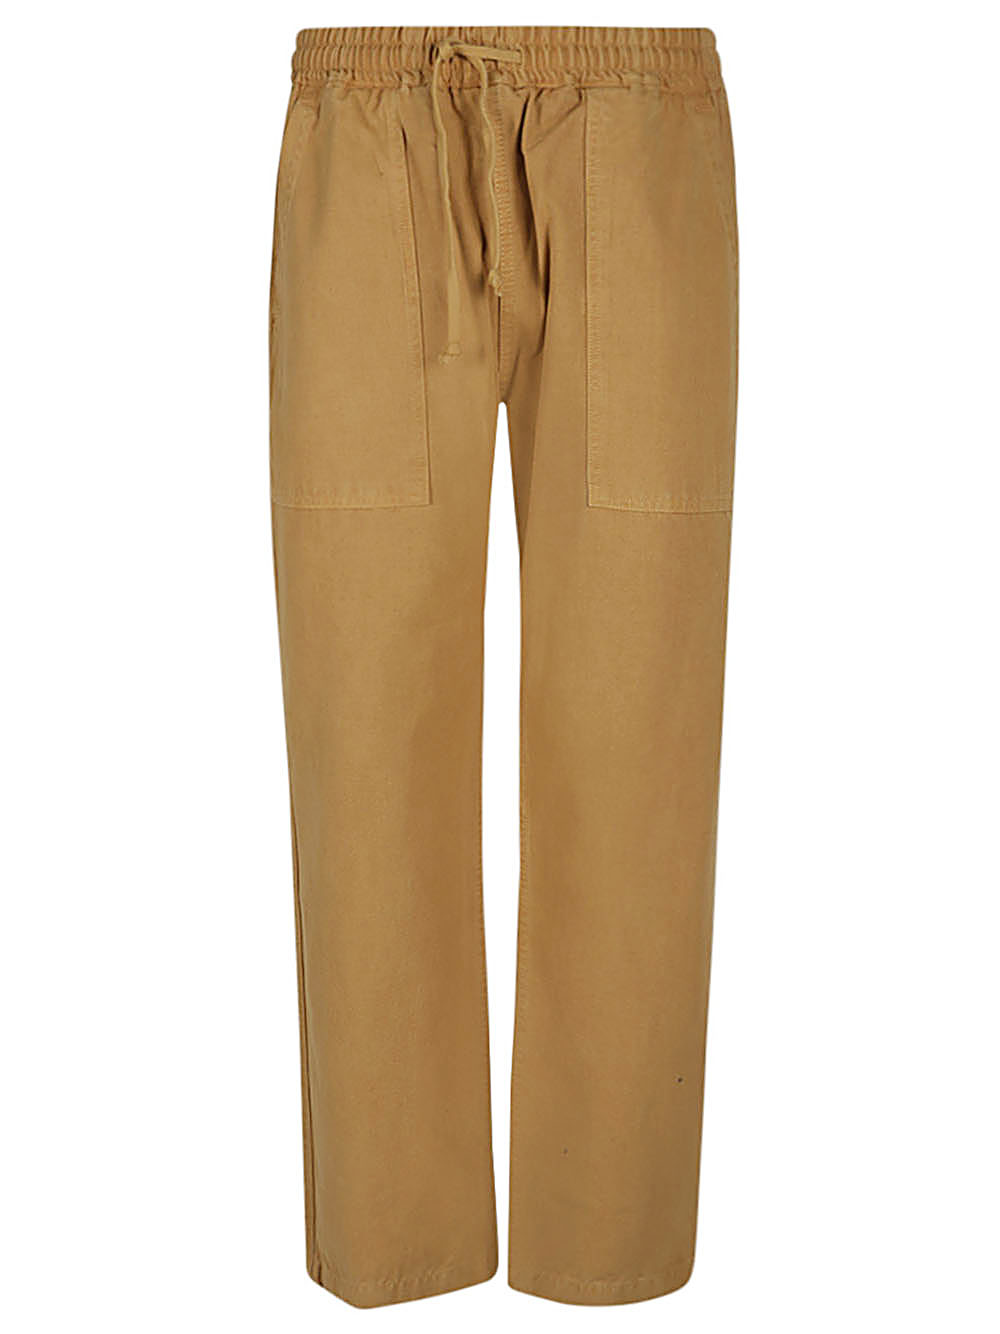 Service Works SERVICE WORKS- Classic Canvas Chef Pants